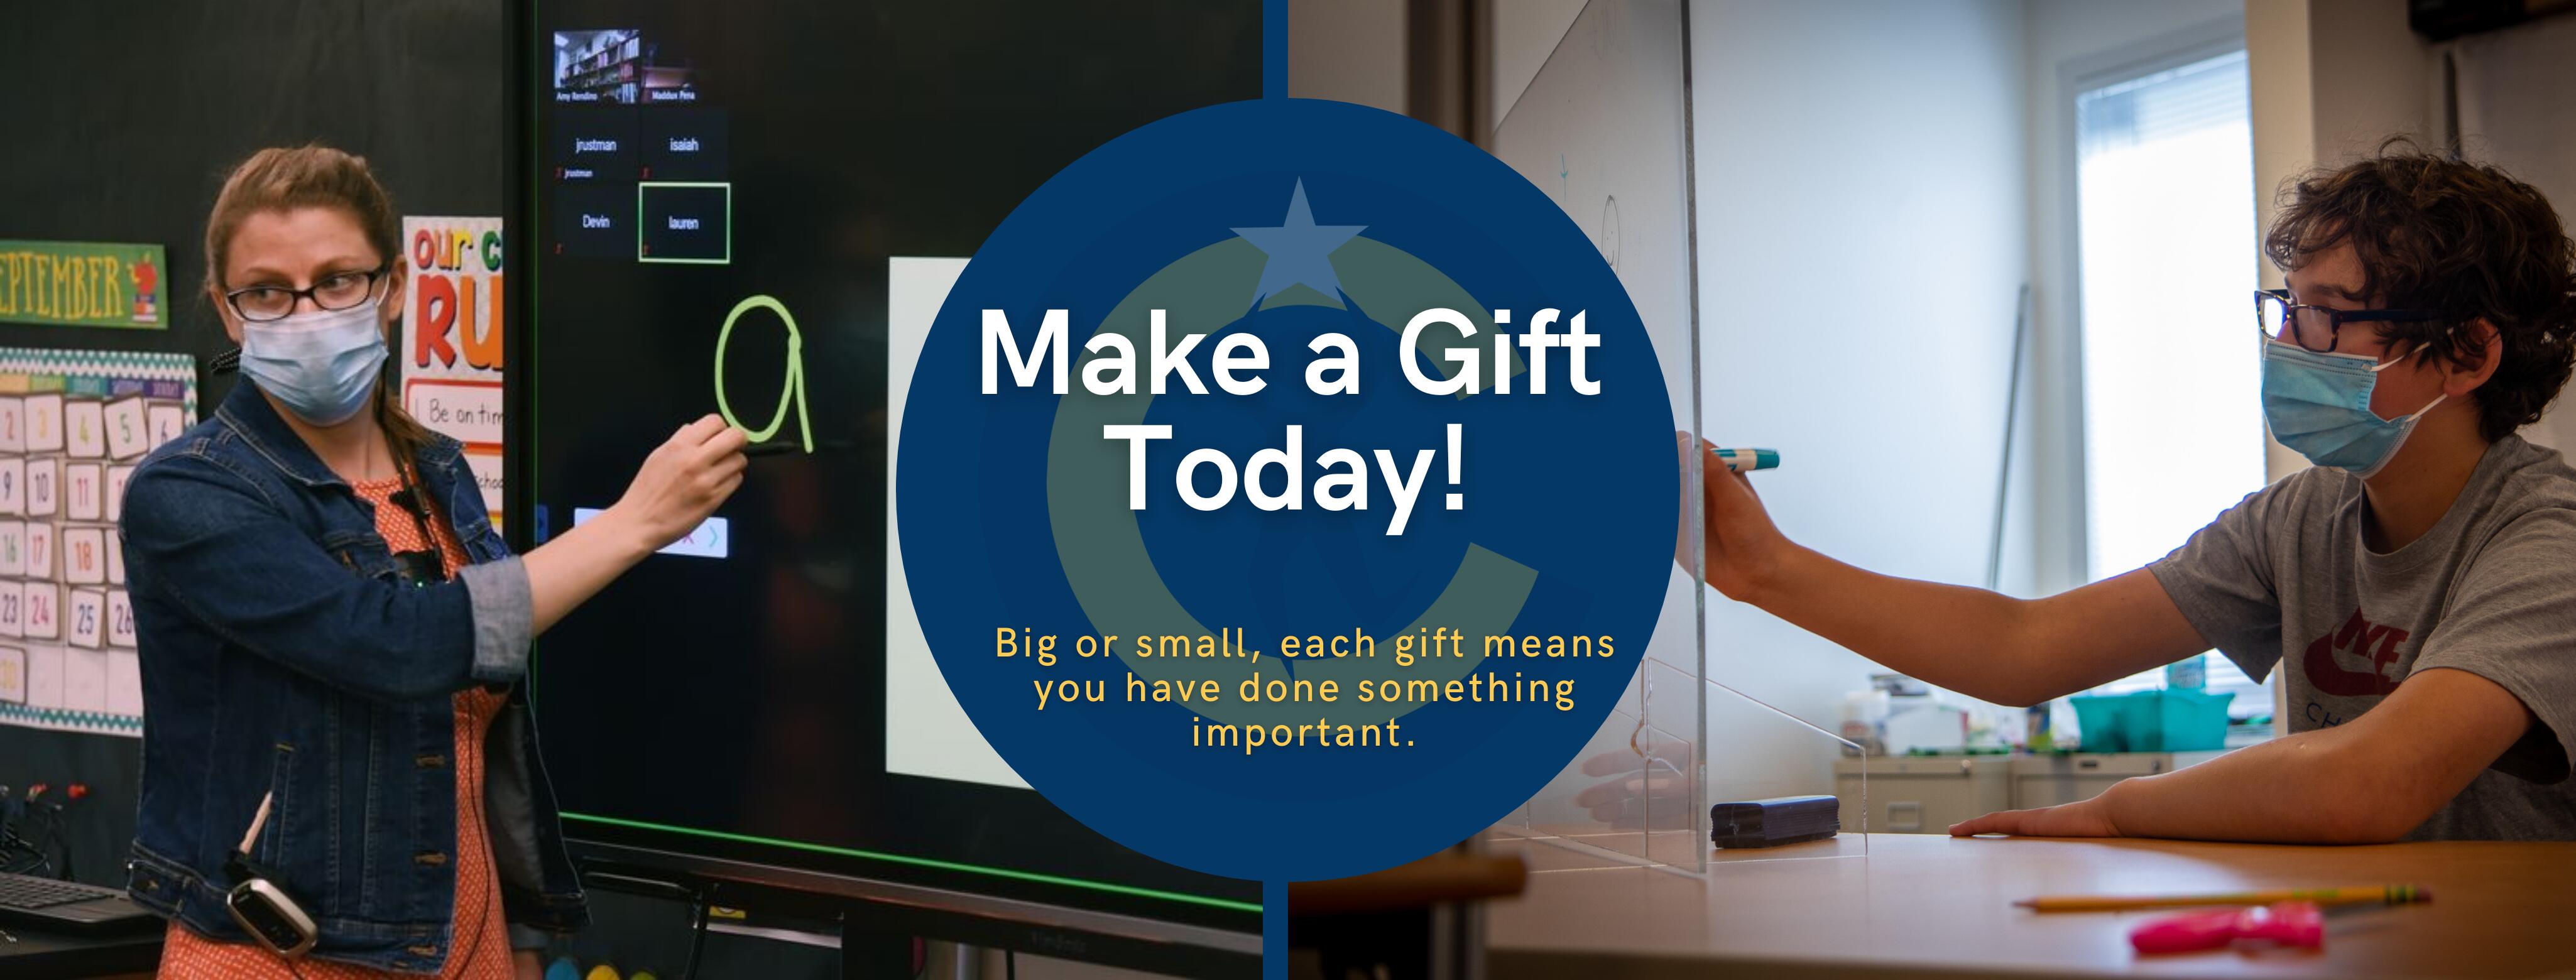 Make a gift Today teacher in a classroom on left and student working at a desk on the right